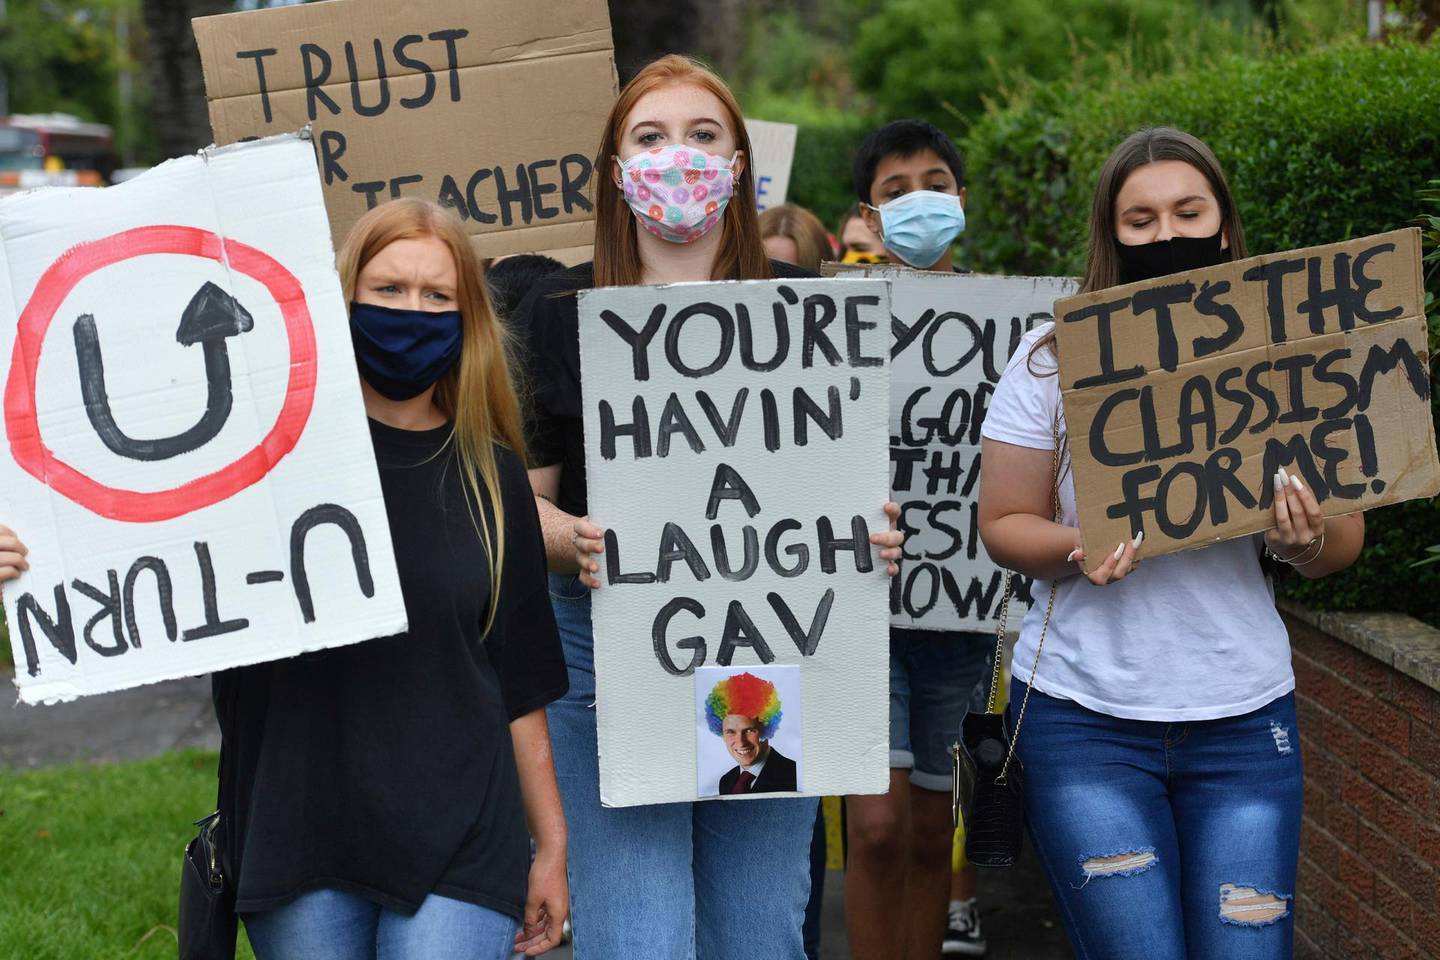 Students march to the constituency office of their local lawmaker, Education Secretary Gavin Williamson, in South Staffordshire, England, Monday Aug. 17, 2020.  Students are protesting over the government's handling of A-level results, using an algorithm to work out marks, with many students receiving lower than expected grades after their exams were cancelled because of the coronavirus restrictions. (Jacob King/PA via AP)